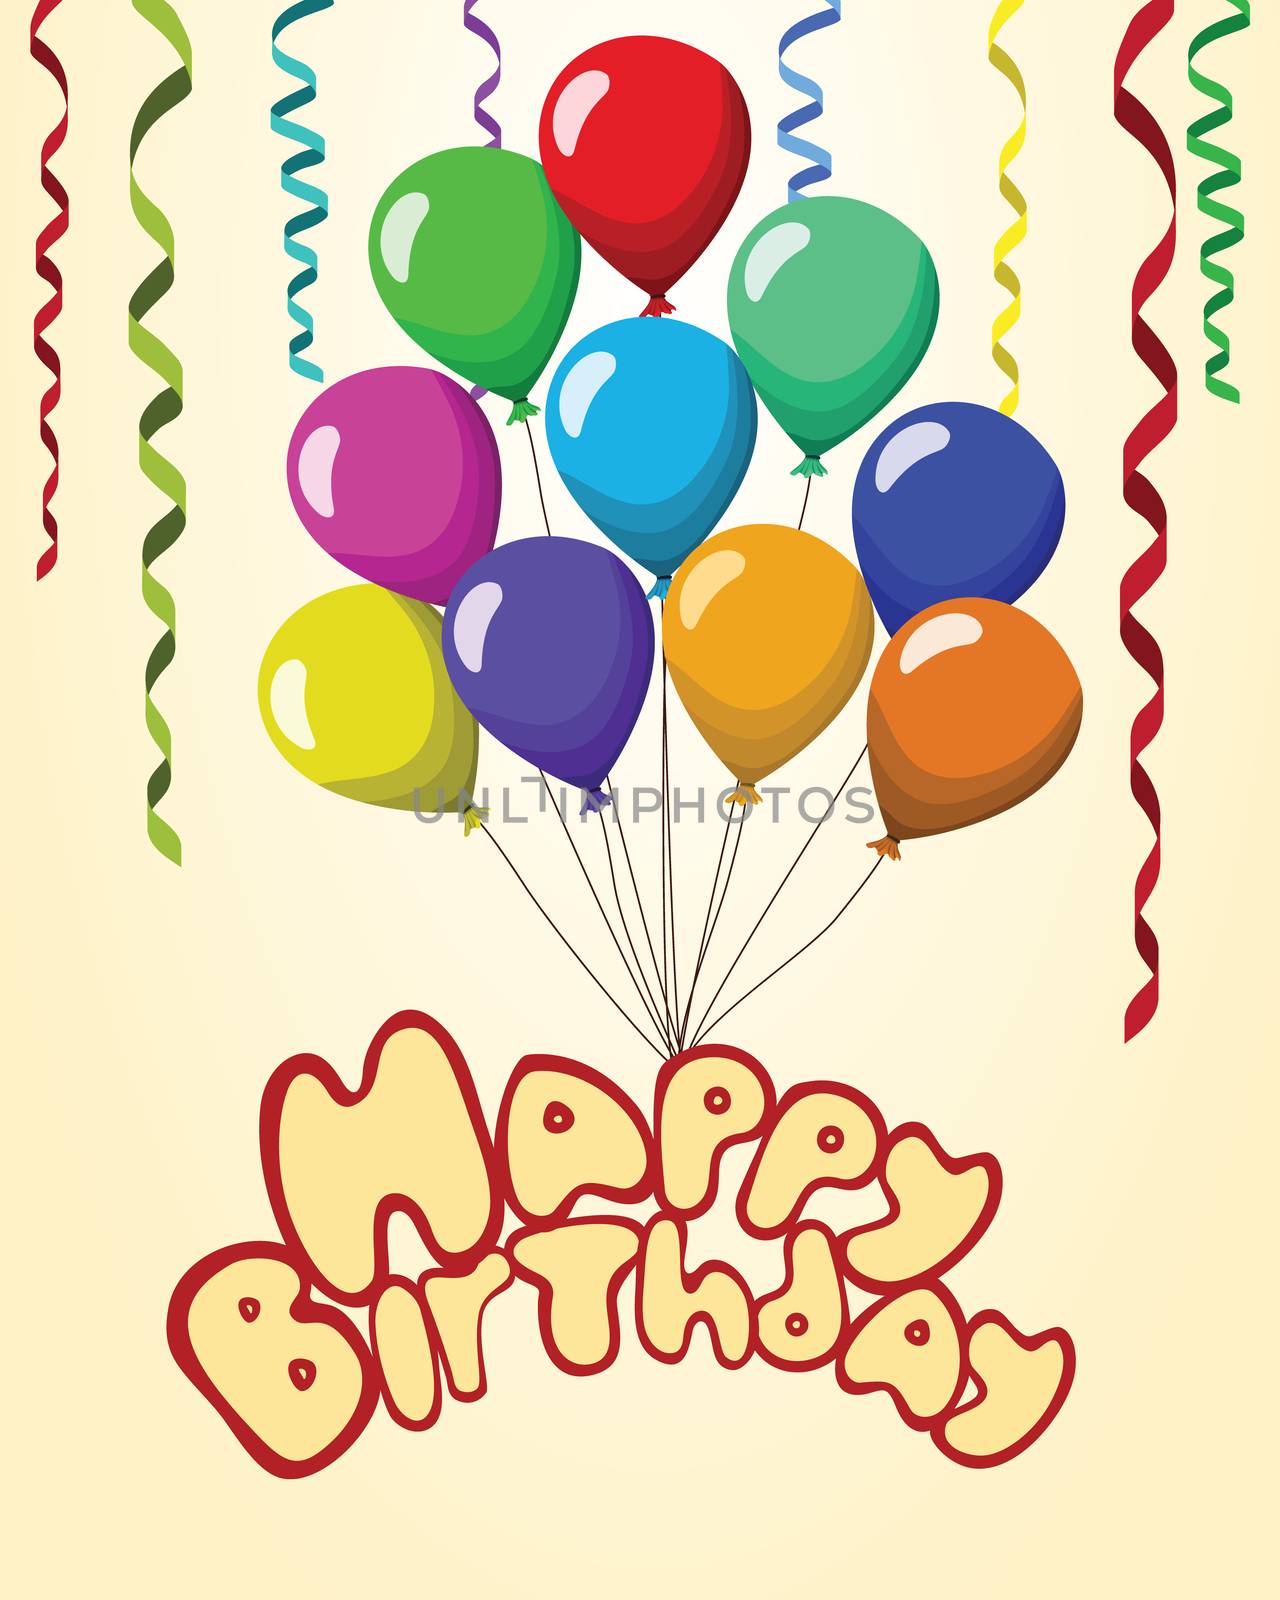 Happy birthday Text baloons ribbons pastel background.